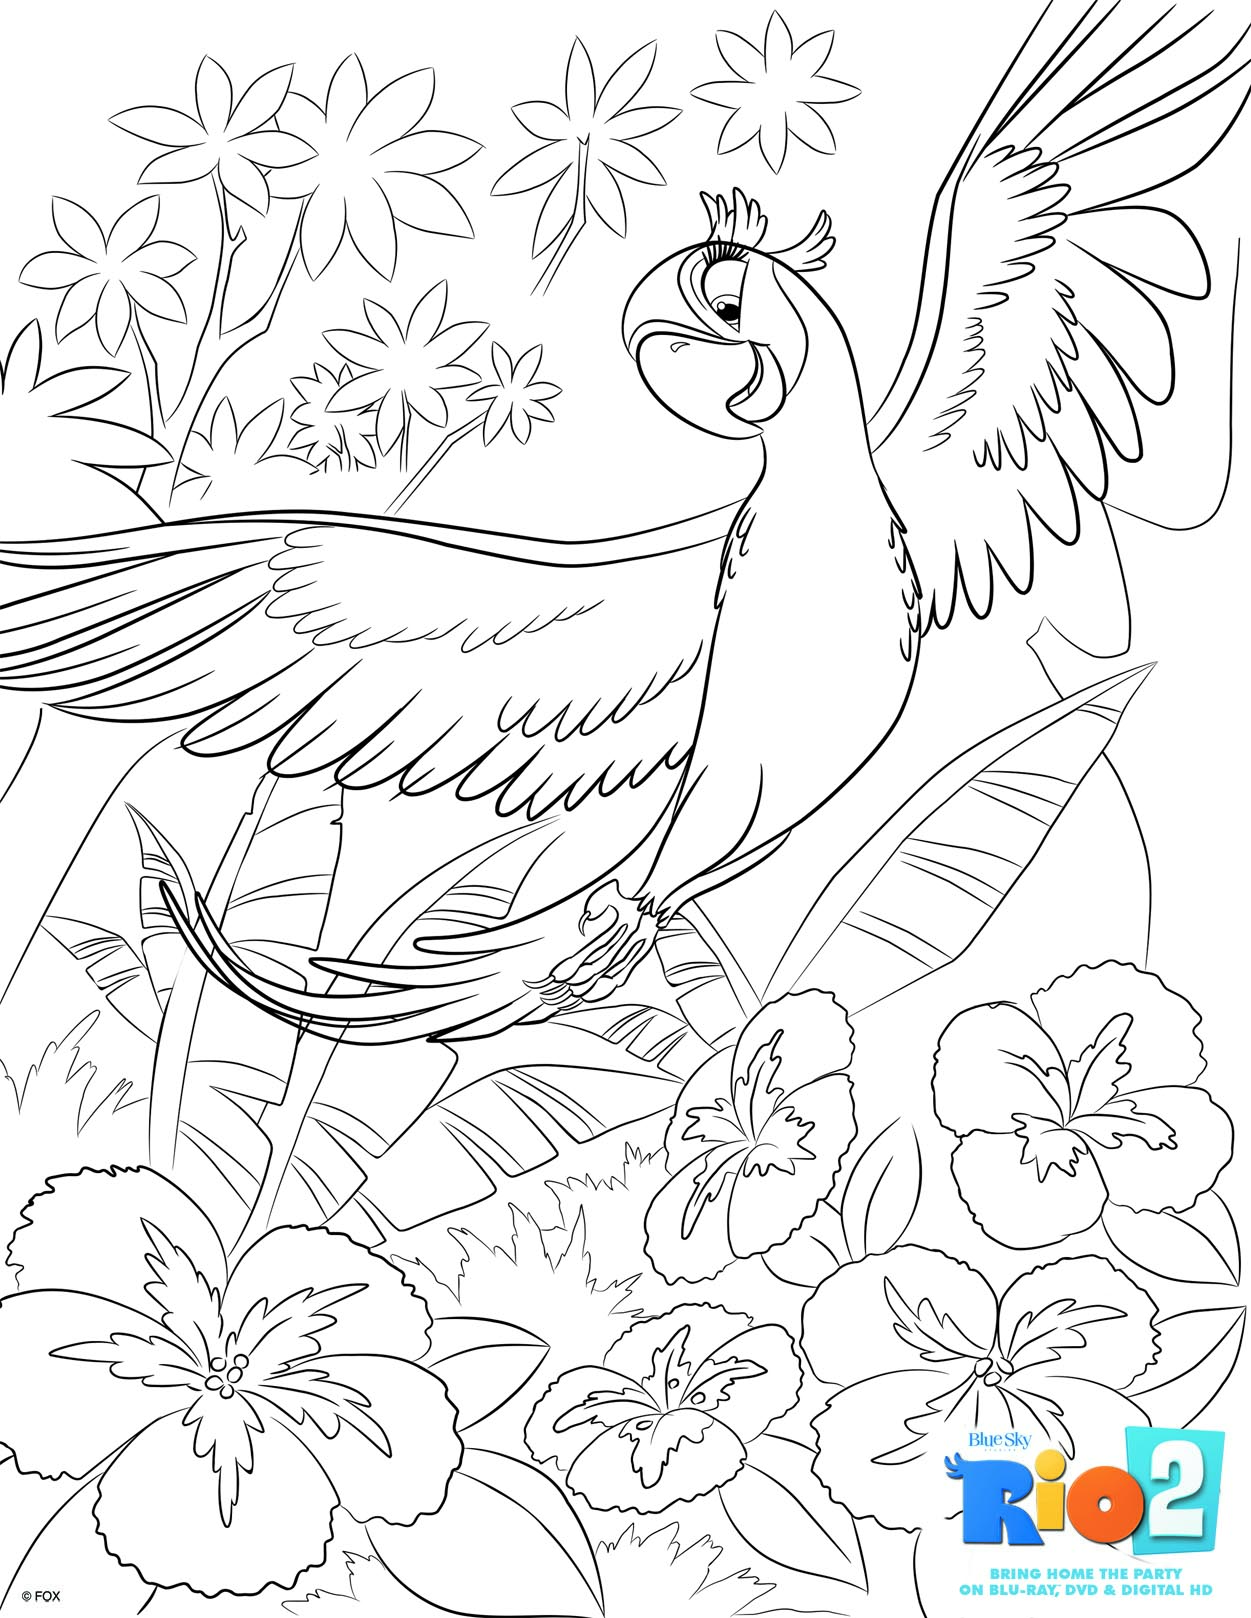 Jewel in the jungle colouring image